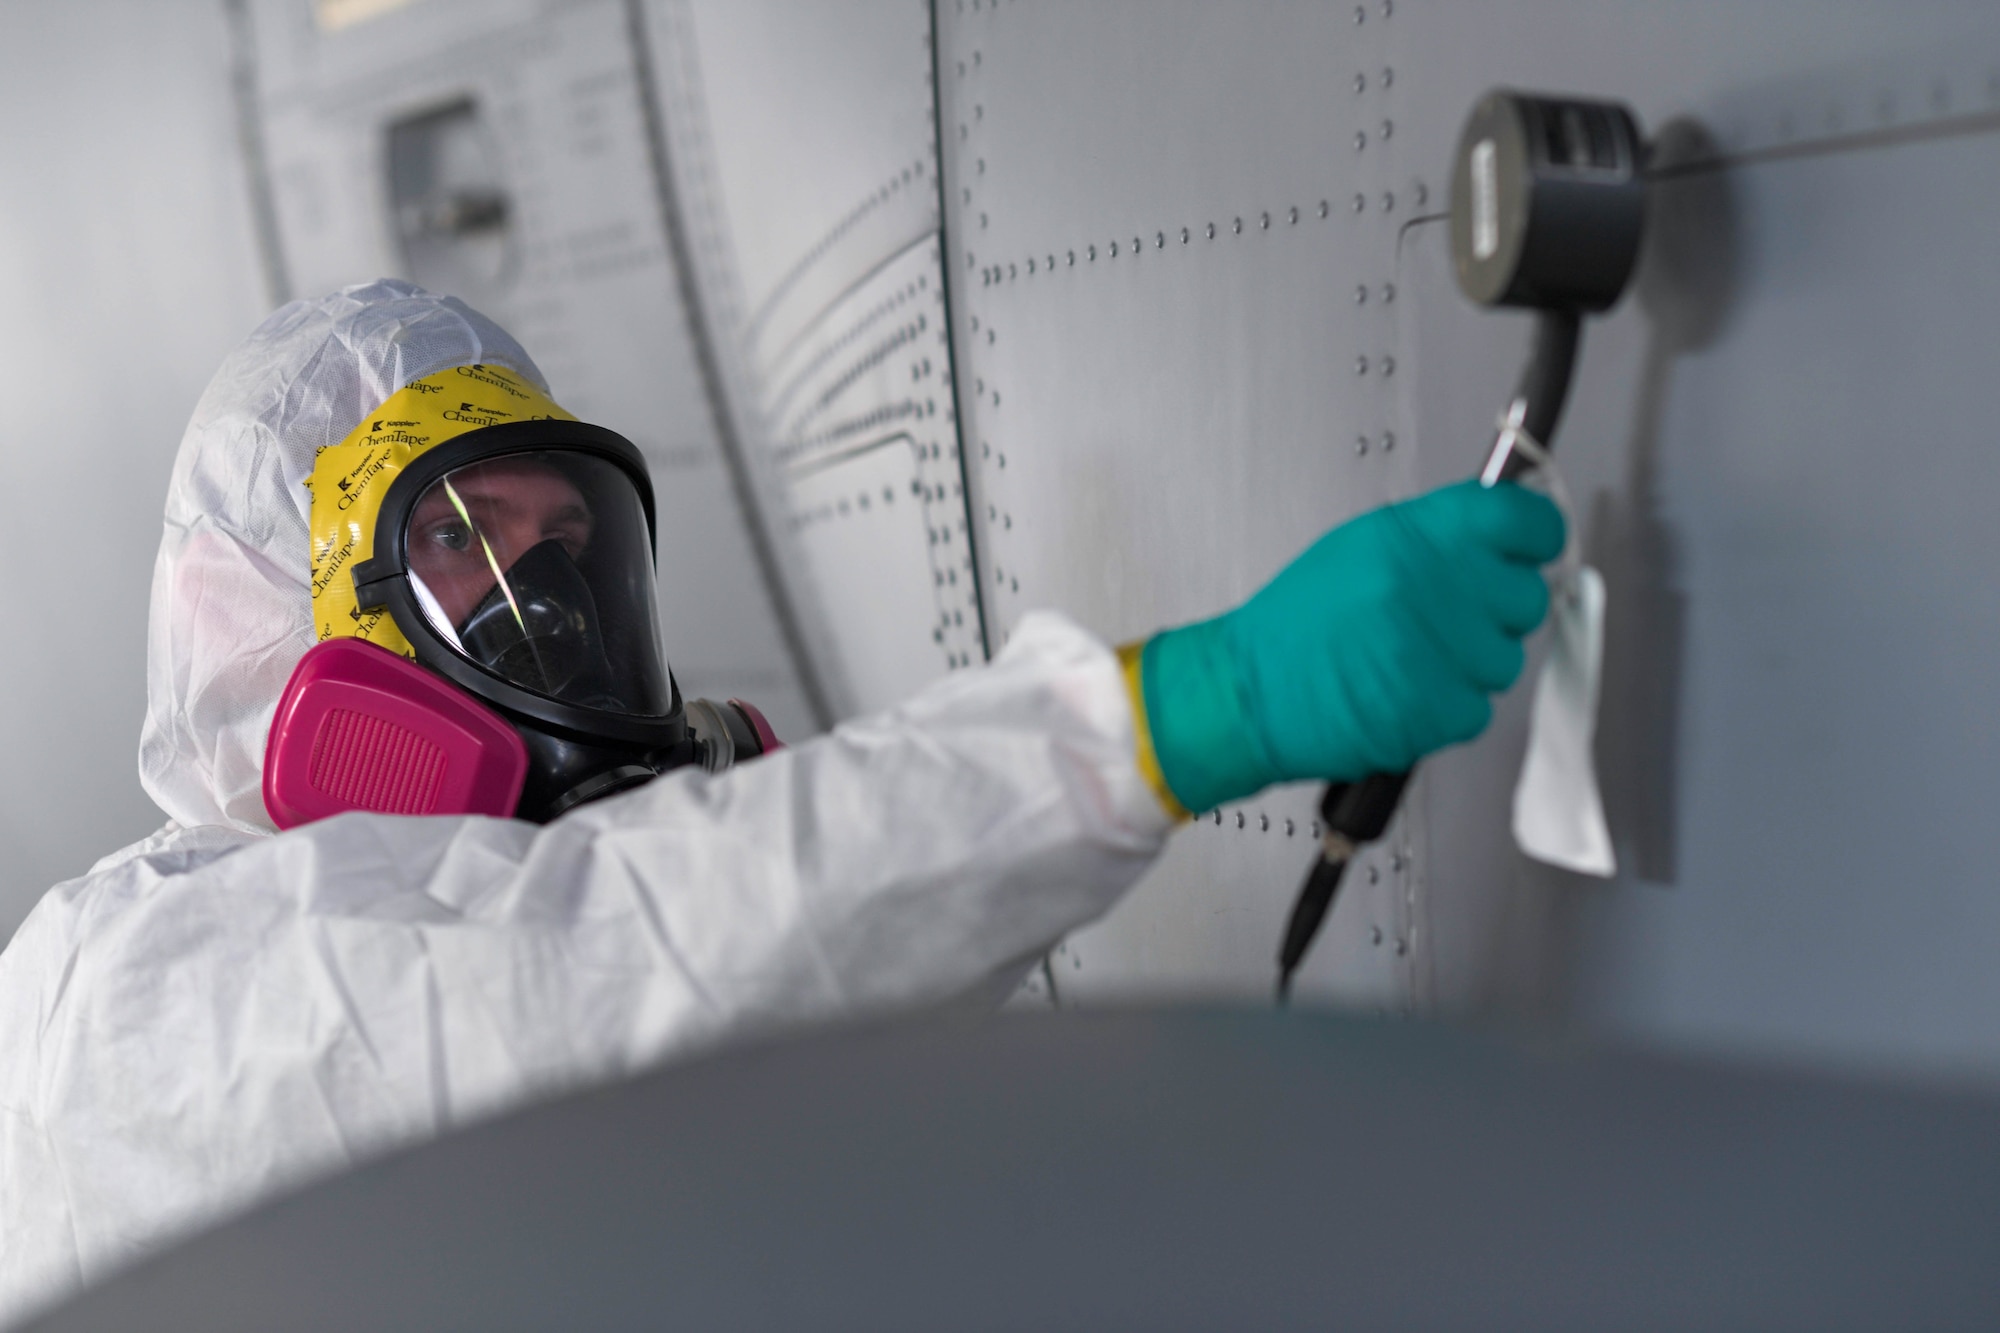 U.S. Air Force Staff Sgt. John Punger, 86th Operational Medical Readiness Squadron bioenvironmental craftsman, conducts decontamination safety procedures during exercise Radiant Falcon at Ramstein Air Base, Germany, March 16, 2023.